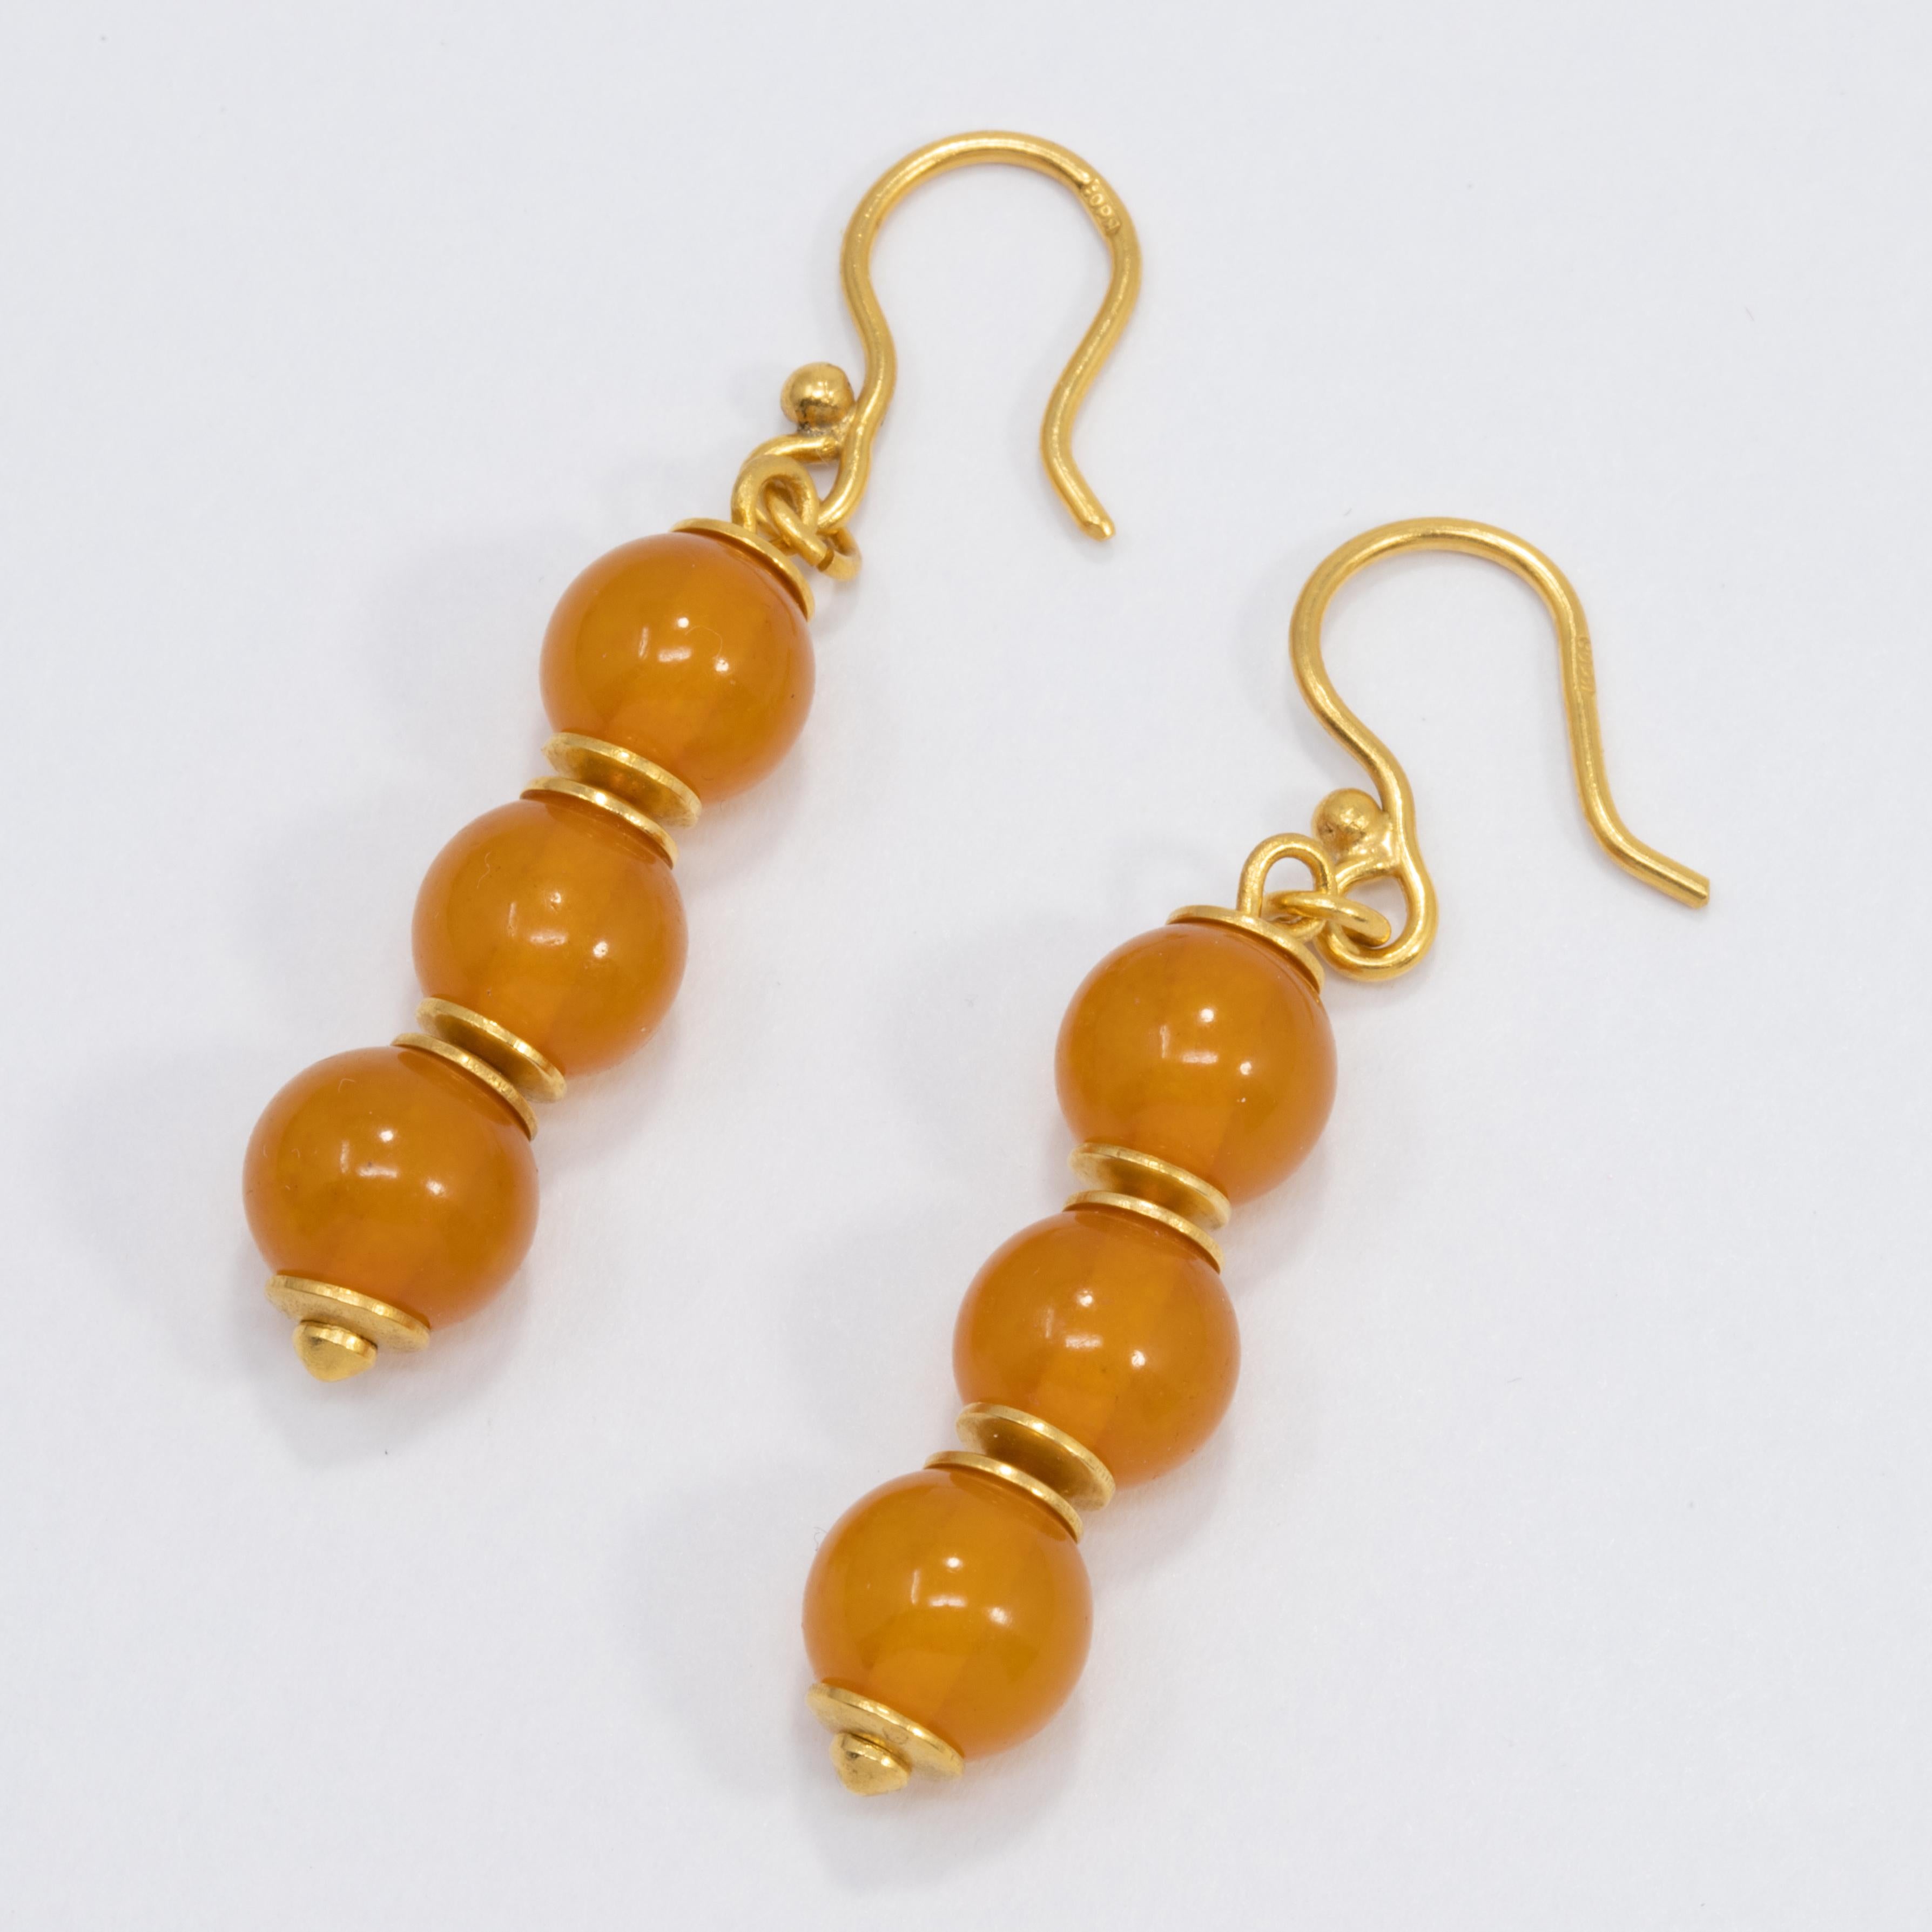 A pair of exquisite Russian earrings. Each earring features three Baltic amber beads in a rich orange color, accented with goldtone accents and hooks. Stylish!

Hallmarks: Cyrillic markings
Amber beads approx 8mm in diameter